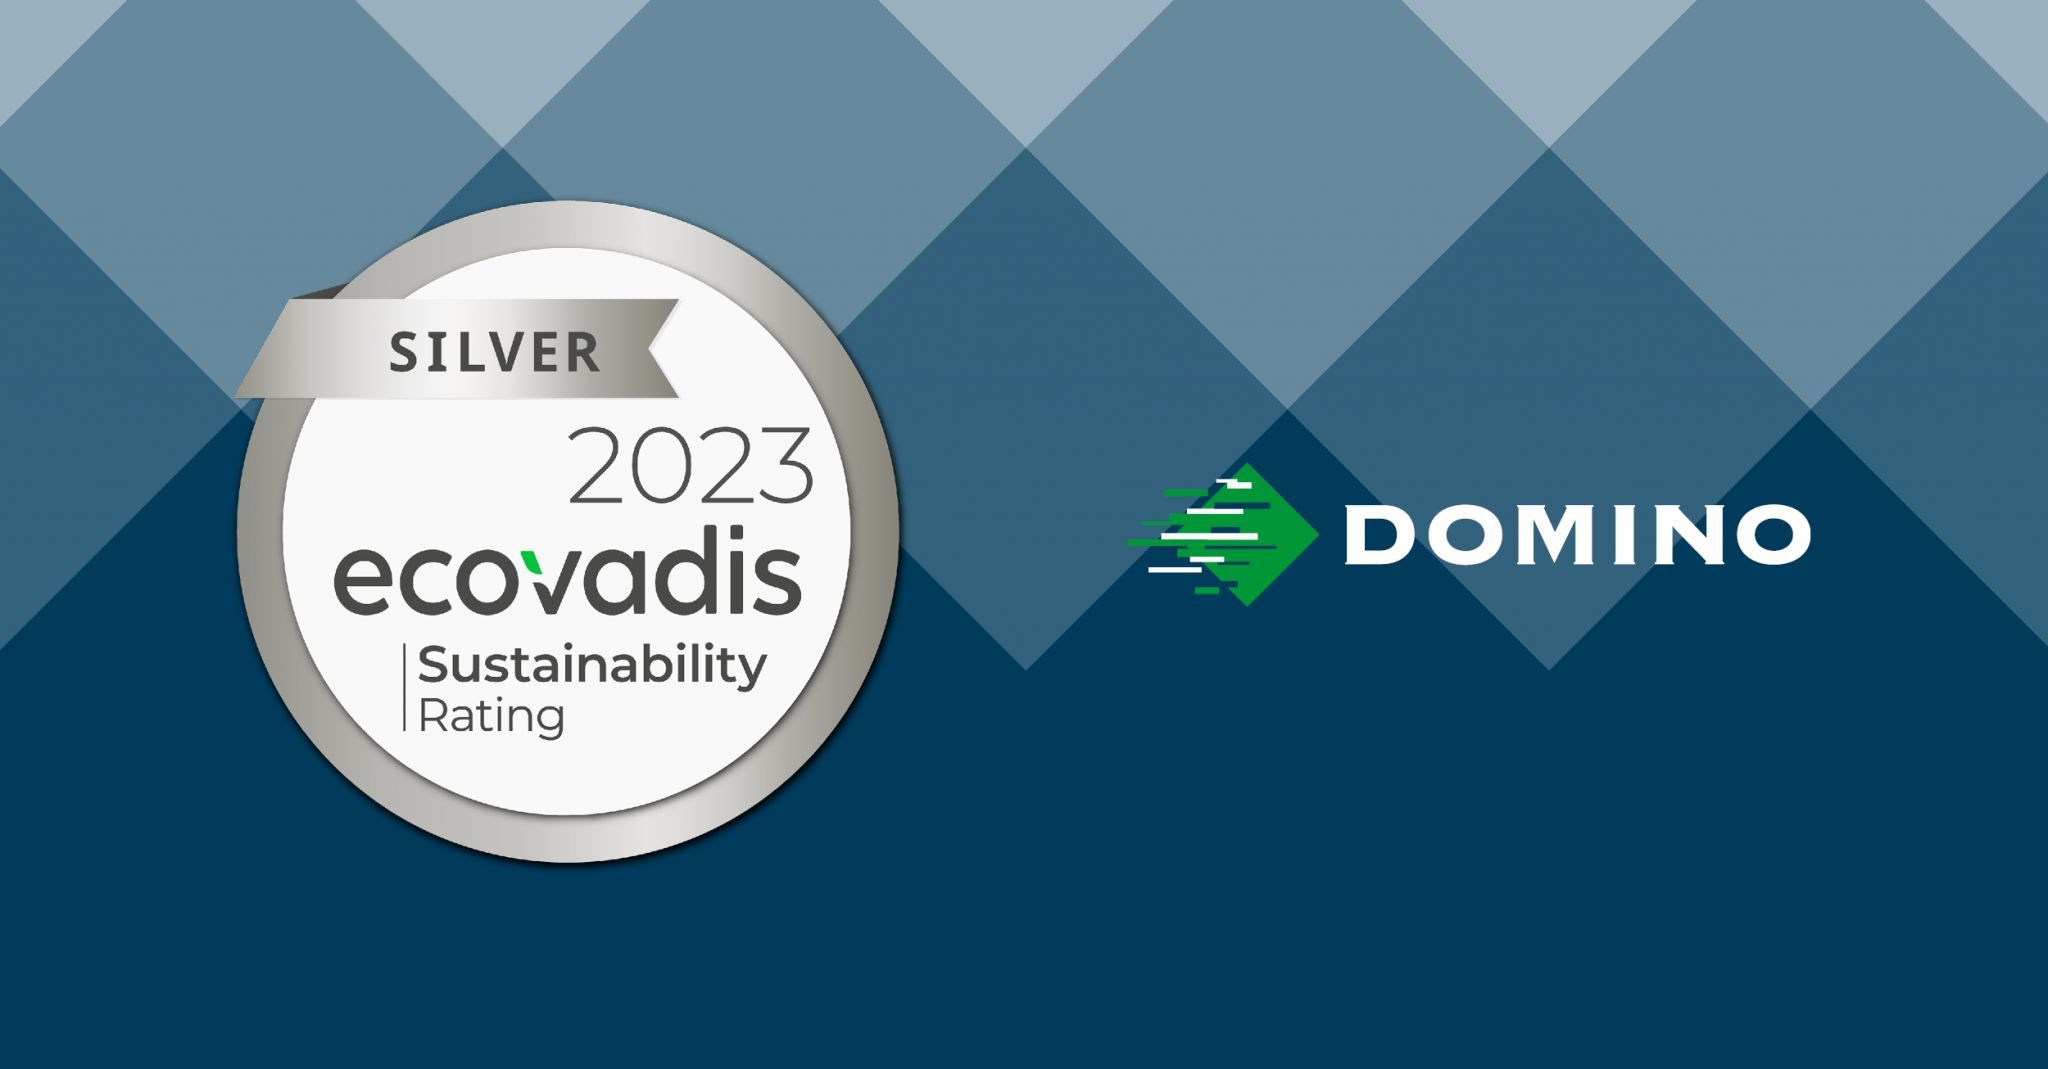 Domino Printing Sciences awarded Silver EcoVadis rating following improvements to CSR performance